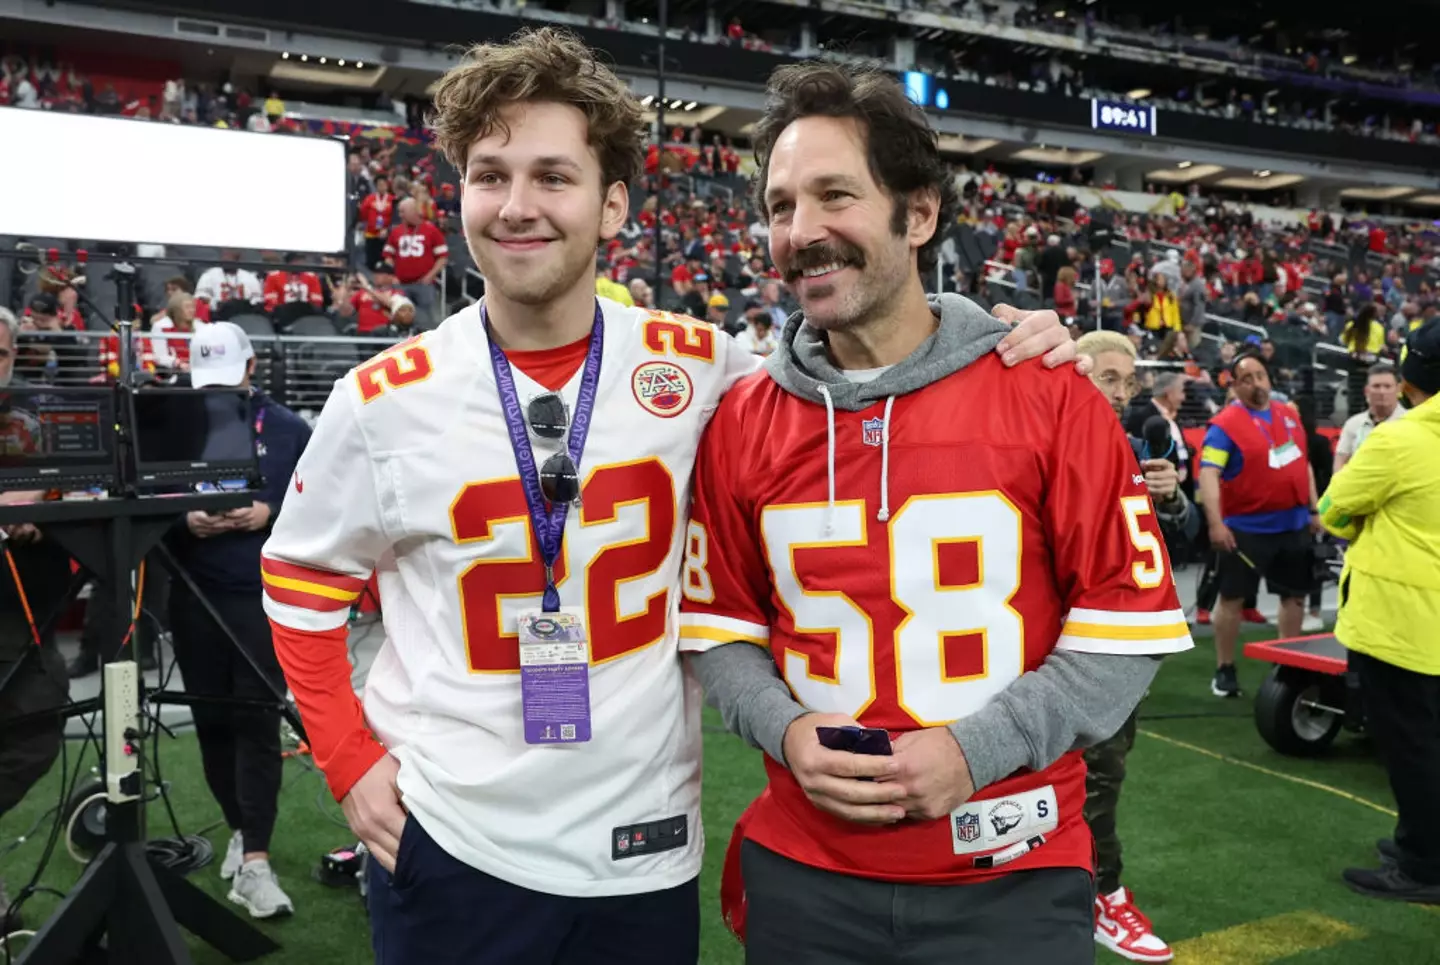 Paul Rudd was joined by his son Jack at the Super Bowl.